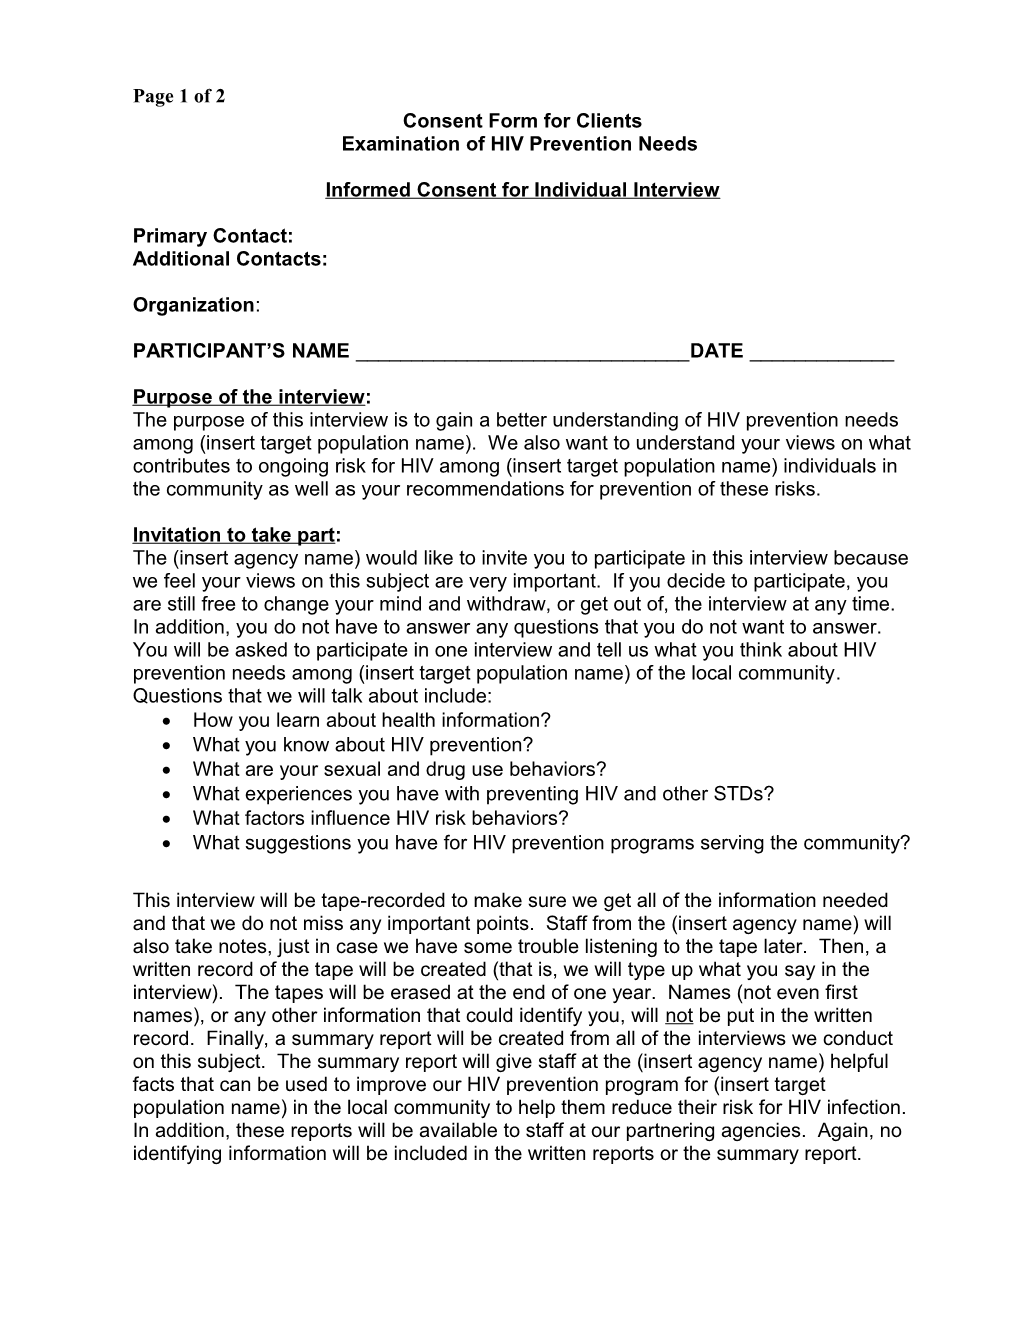 Consent Form for Clients